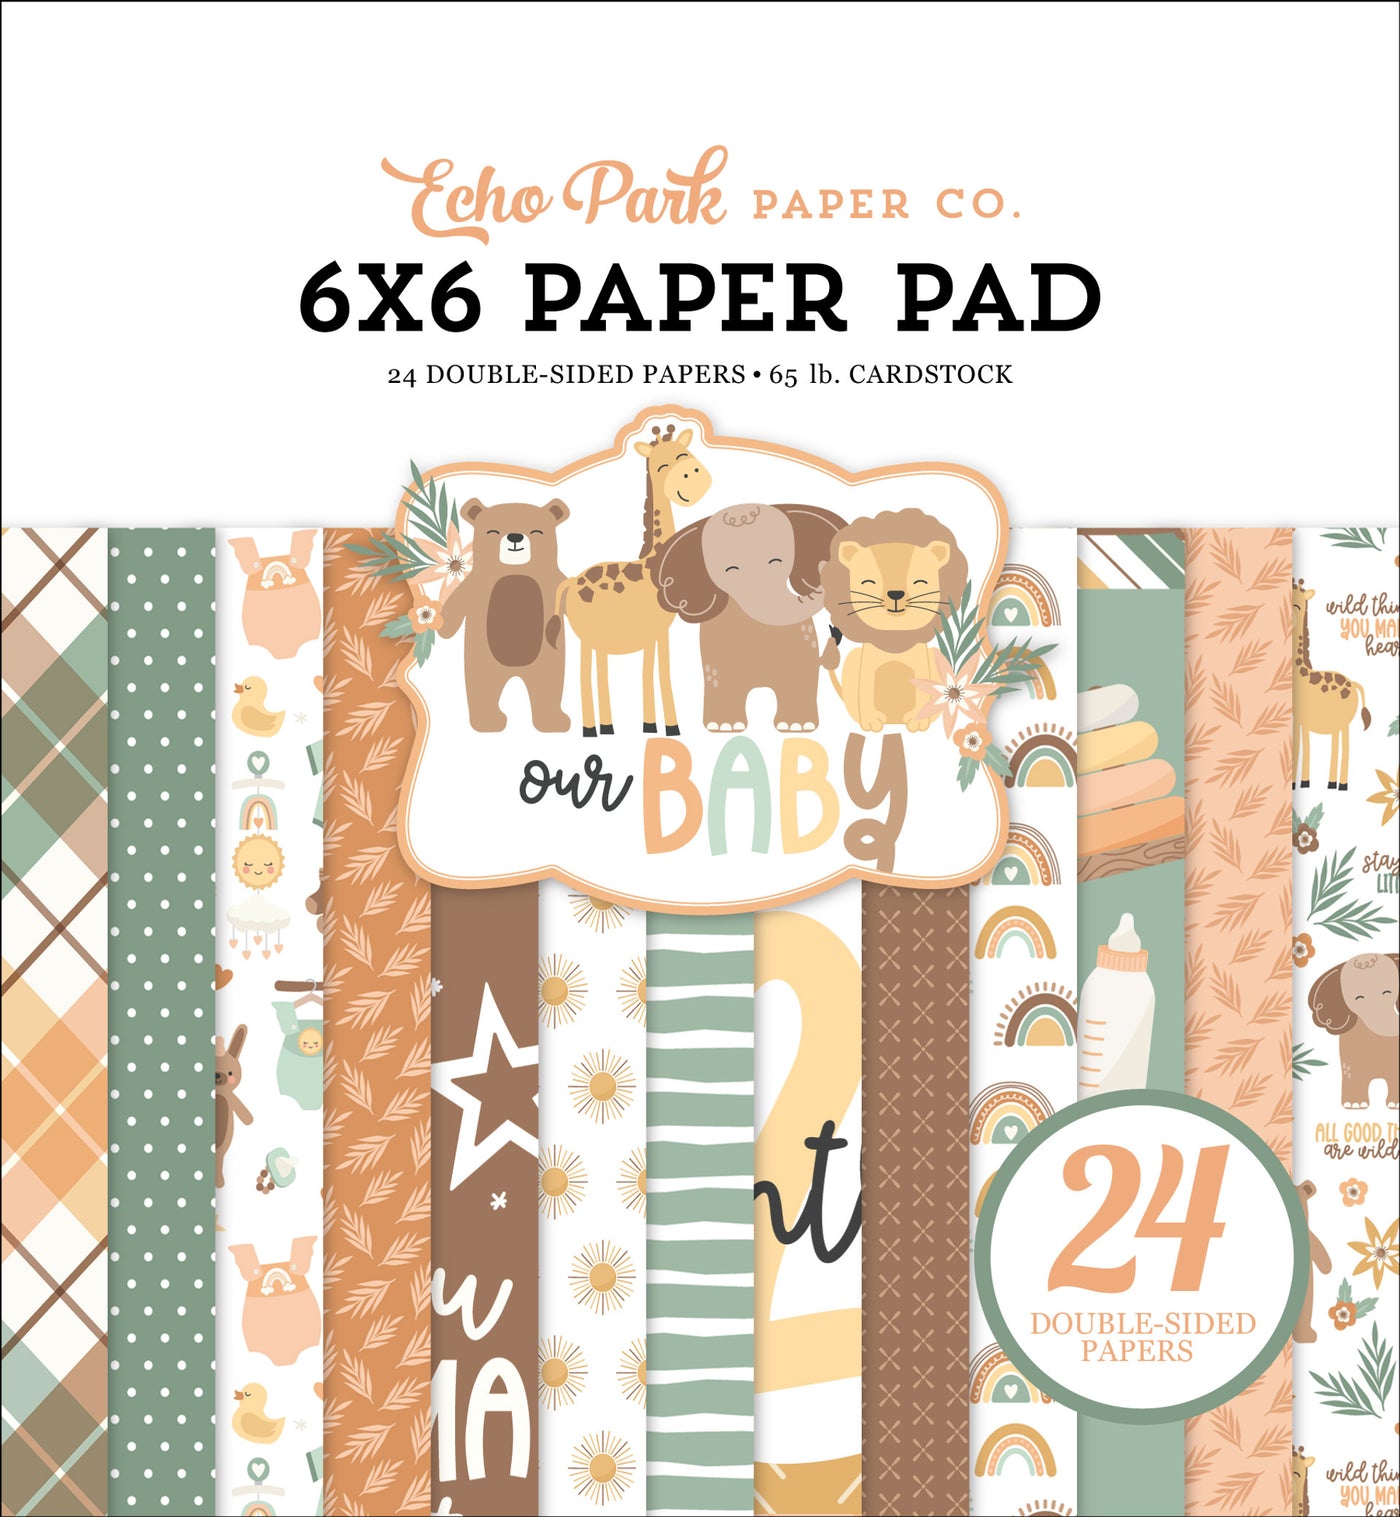 Great patterns in neutral baby colors to help you spread the great news. 6x6 pad with 24 double-sided pages great for cards. By Echo Park Paper.